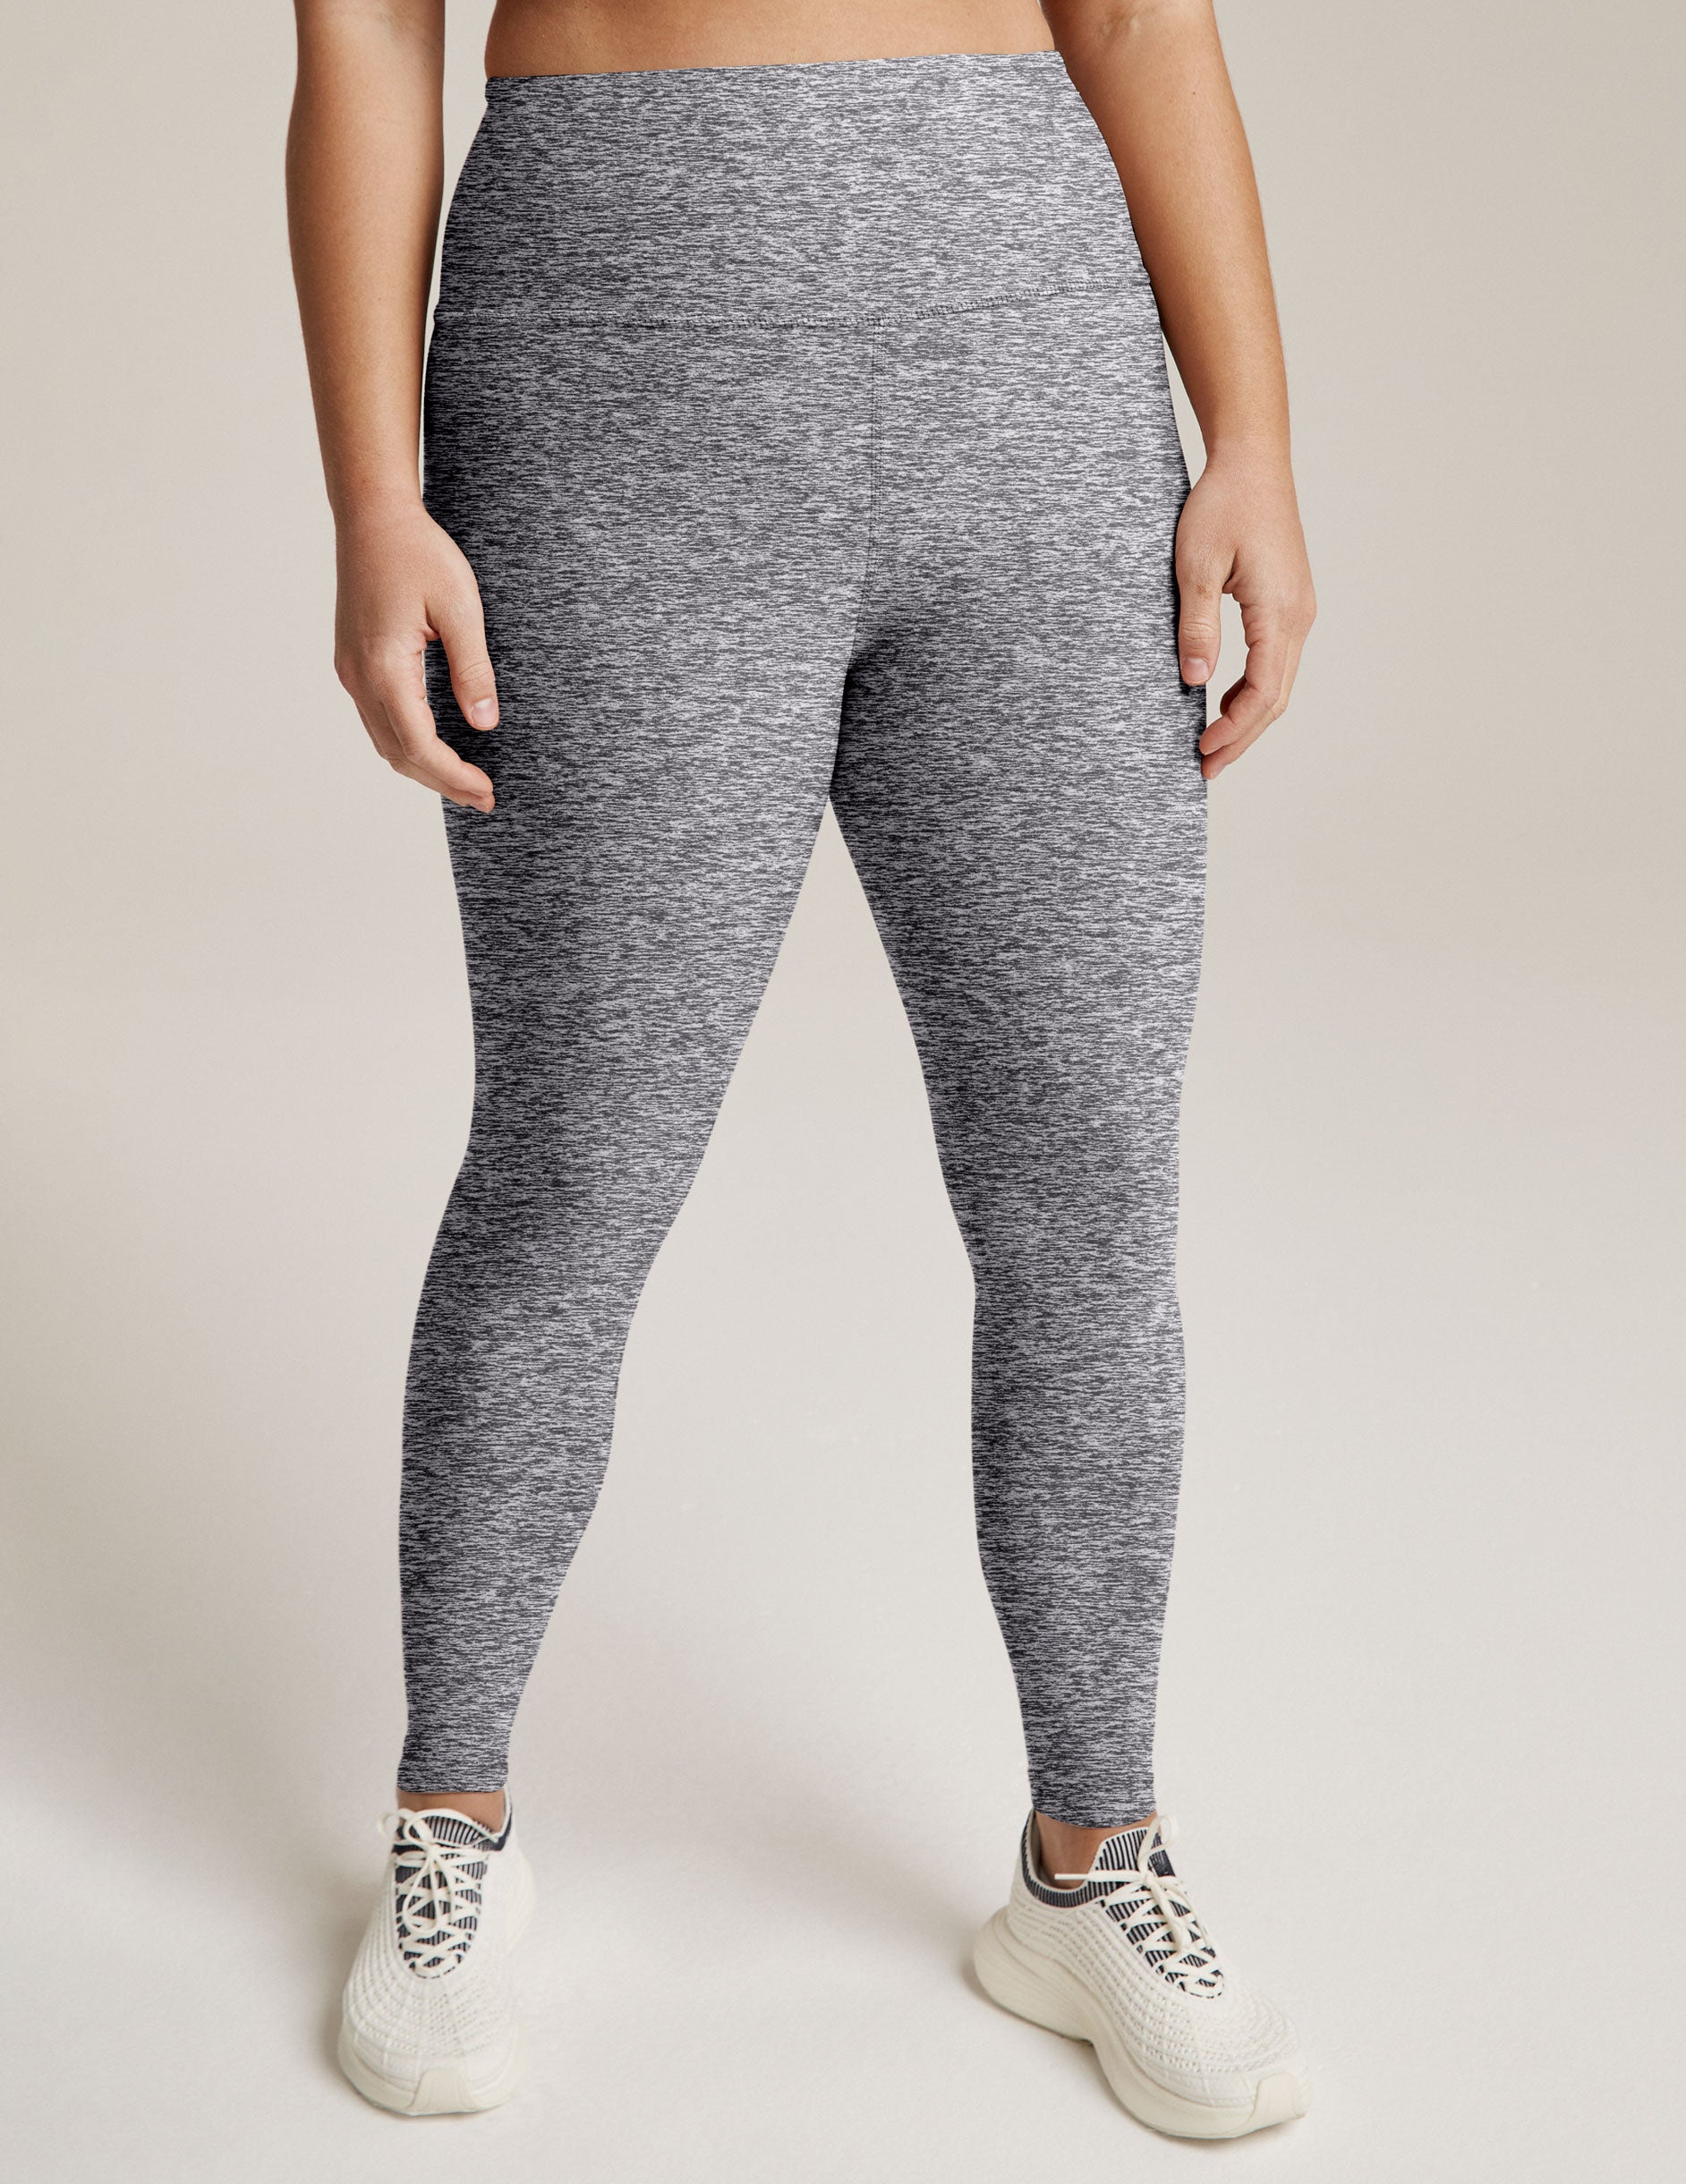 Soft Leggings: Beyond Yoga Spacedye Caught In The Midi High Waisted Legging, Don't Miss Out on These 75 Fitness Deals, All on Sale For Cyber Monday!